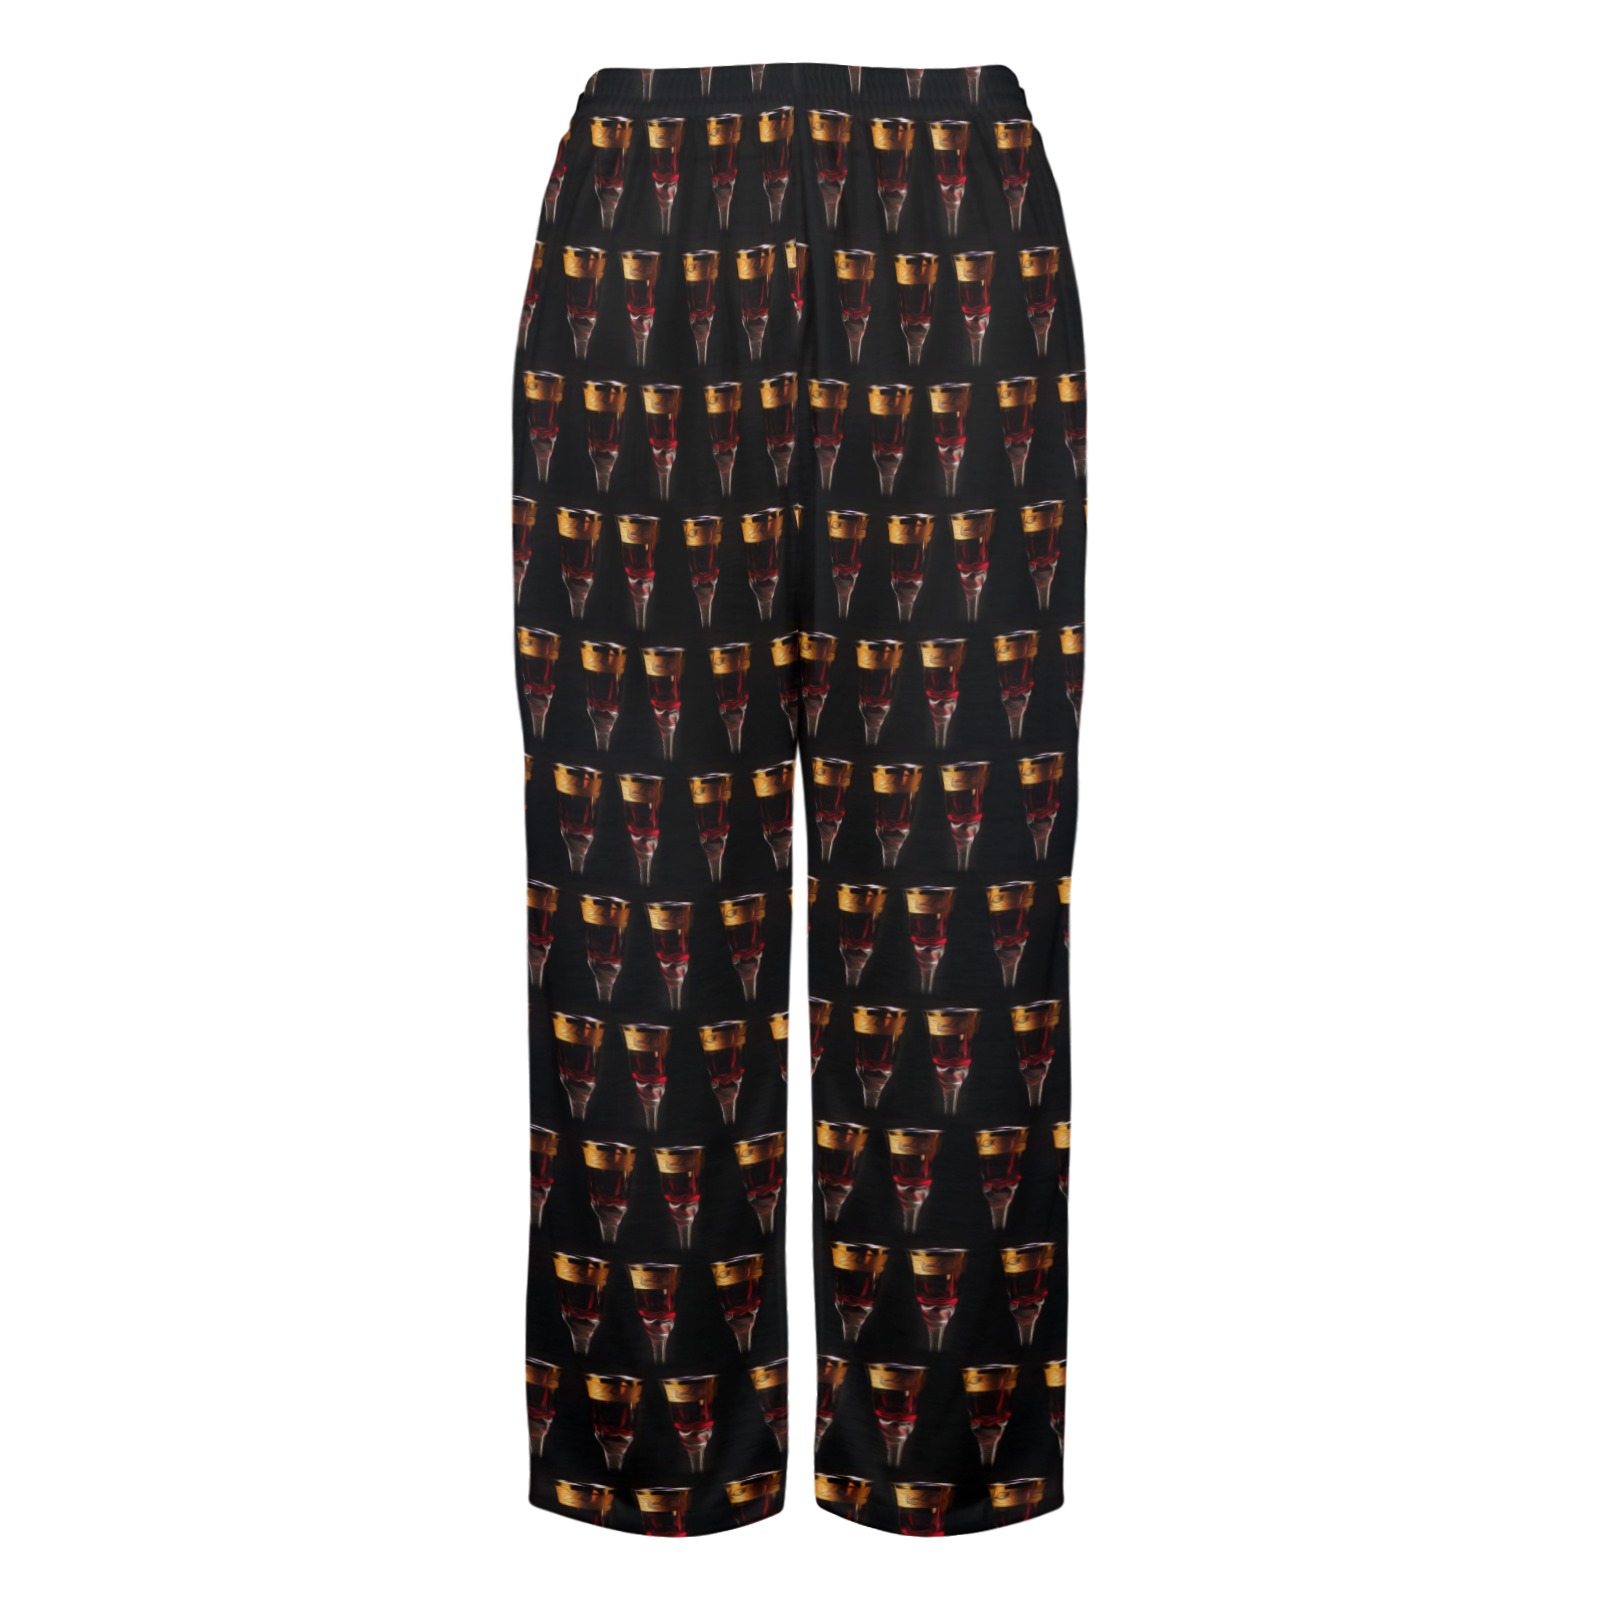 Gothic Wine Glasses Women's Pajama Trousers without Pockets